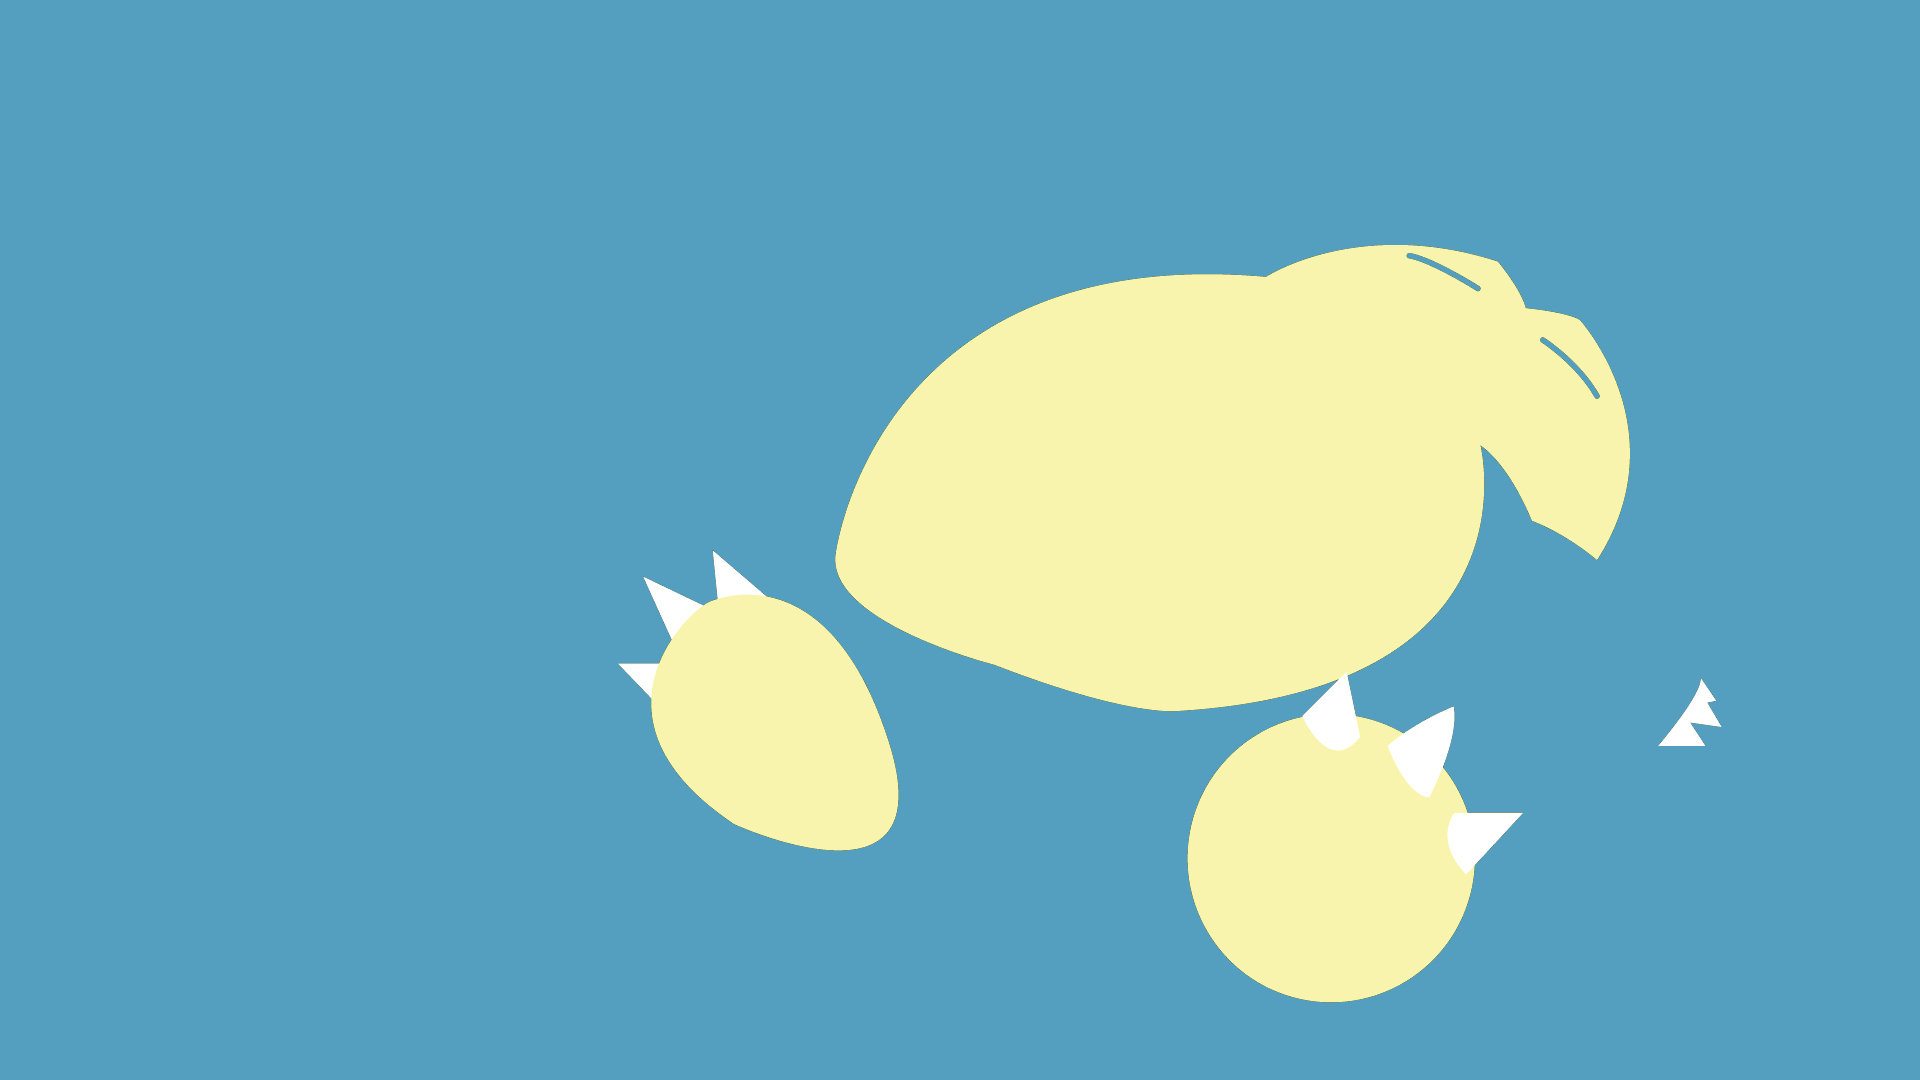 Download The Snorlax Vector Wallpaper, Snorlax Vector Iphone. 